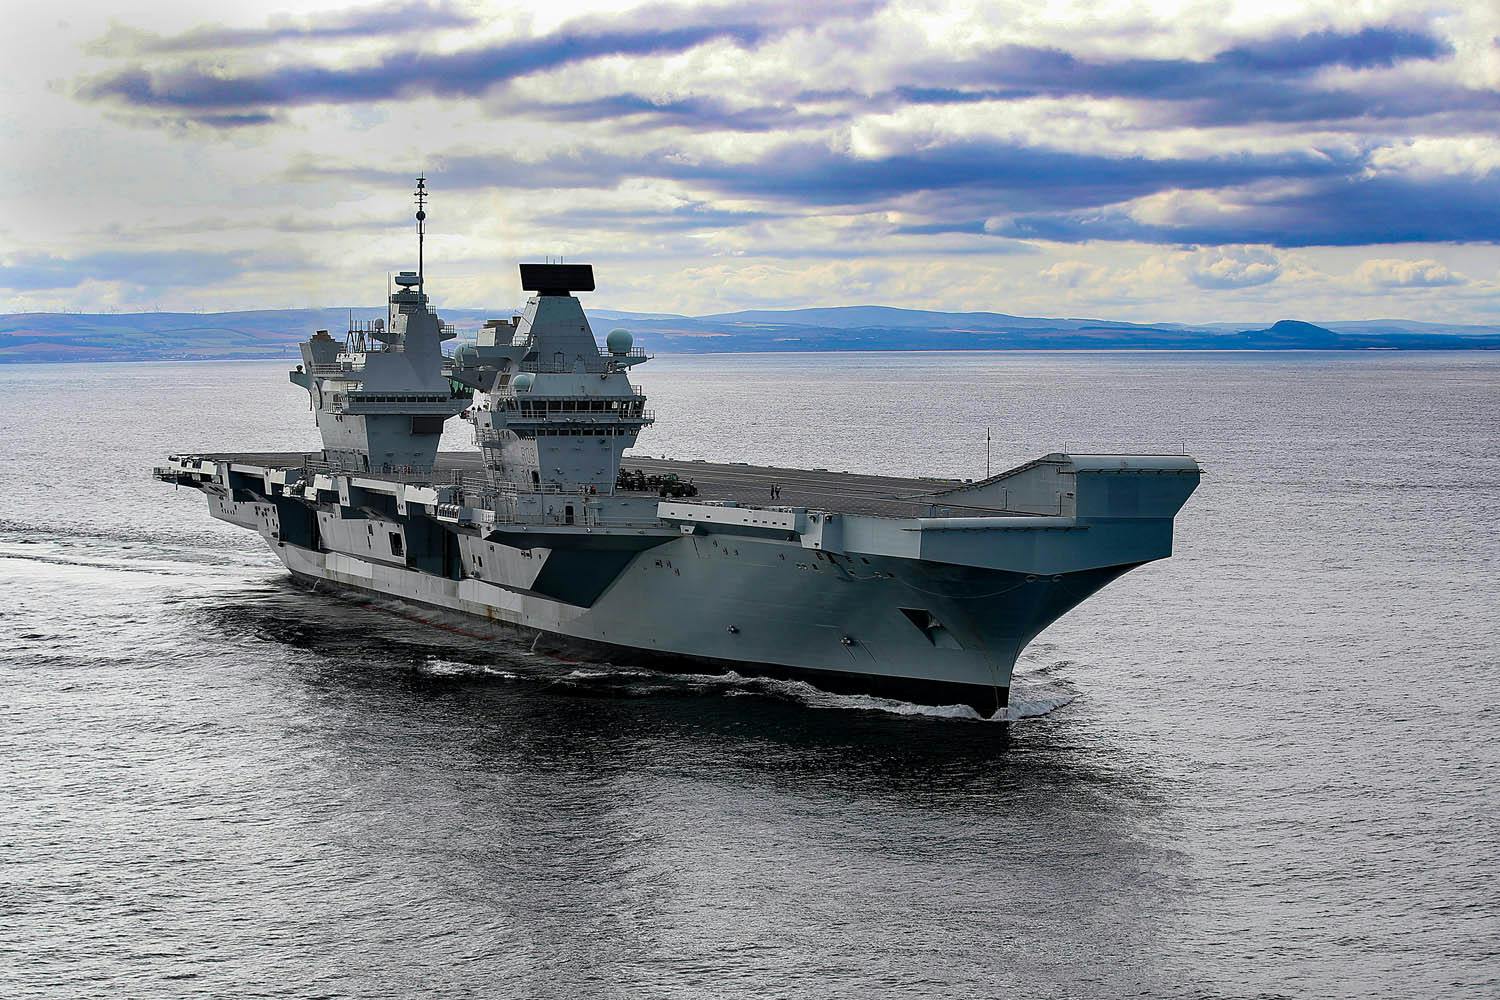 British aircraft carrier finally on way to Scotland for repairs